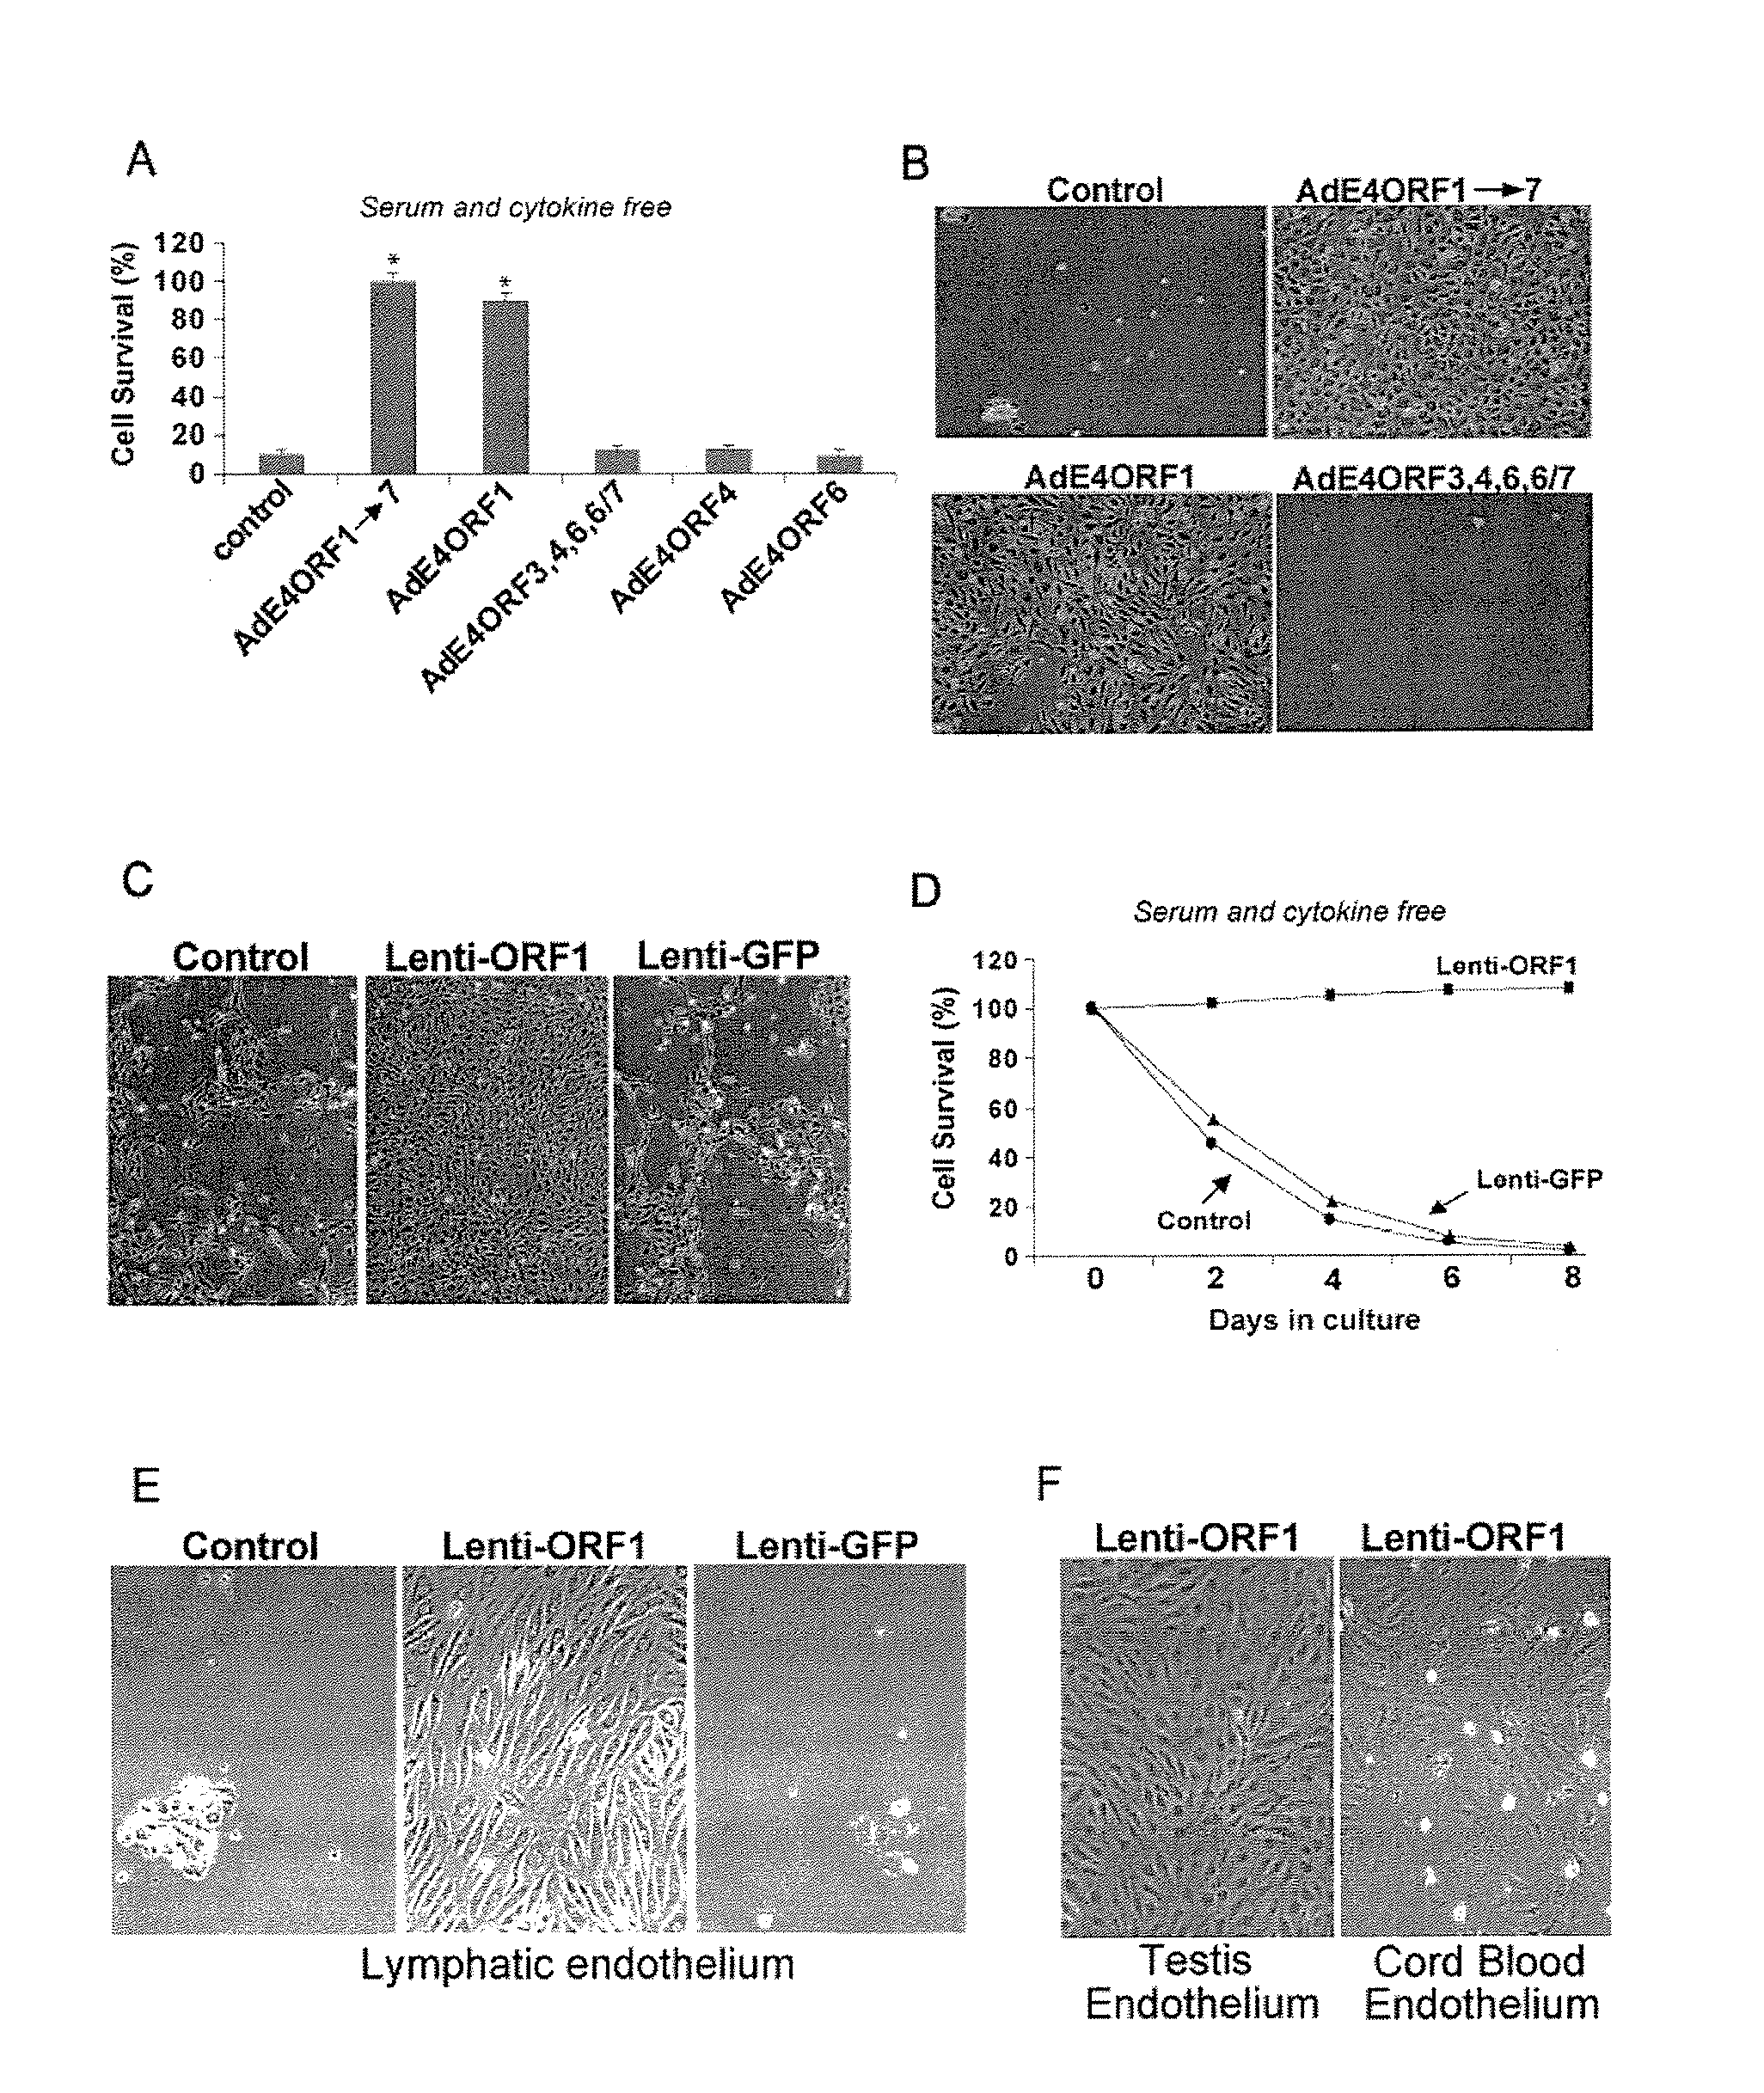 Endothelial cells expressing adenovirus E4ORF1 and methods of use thereof